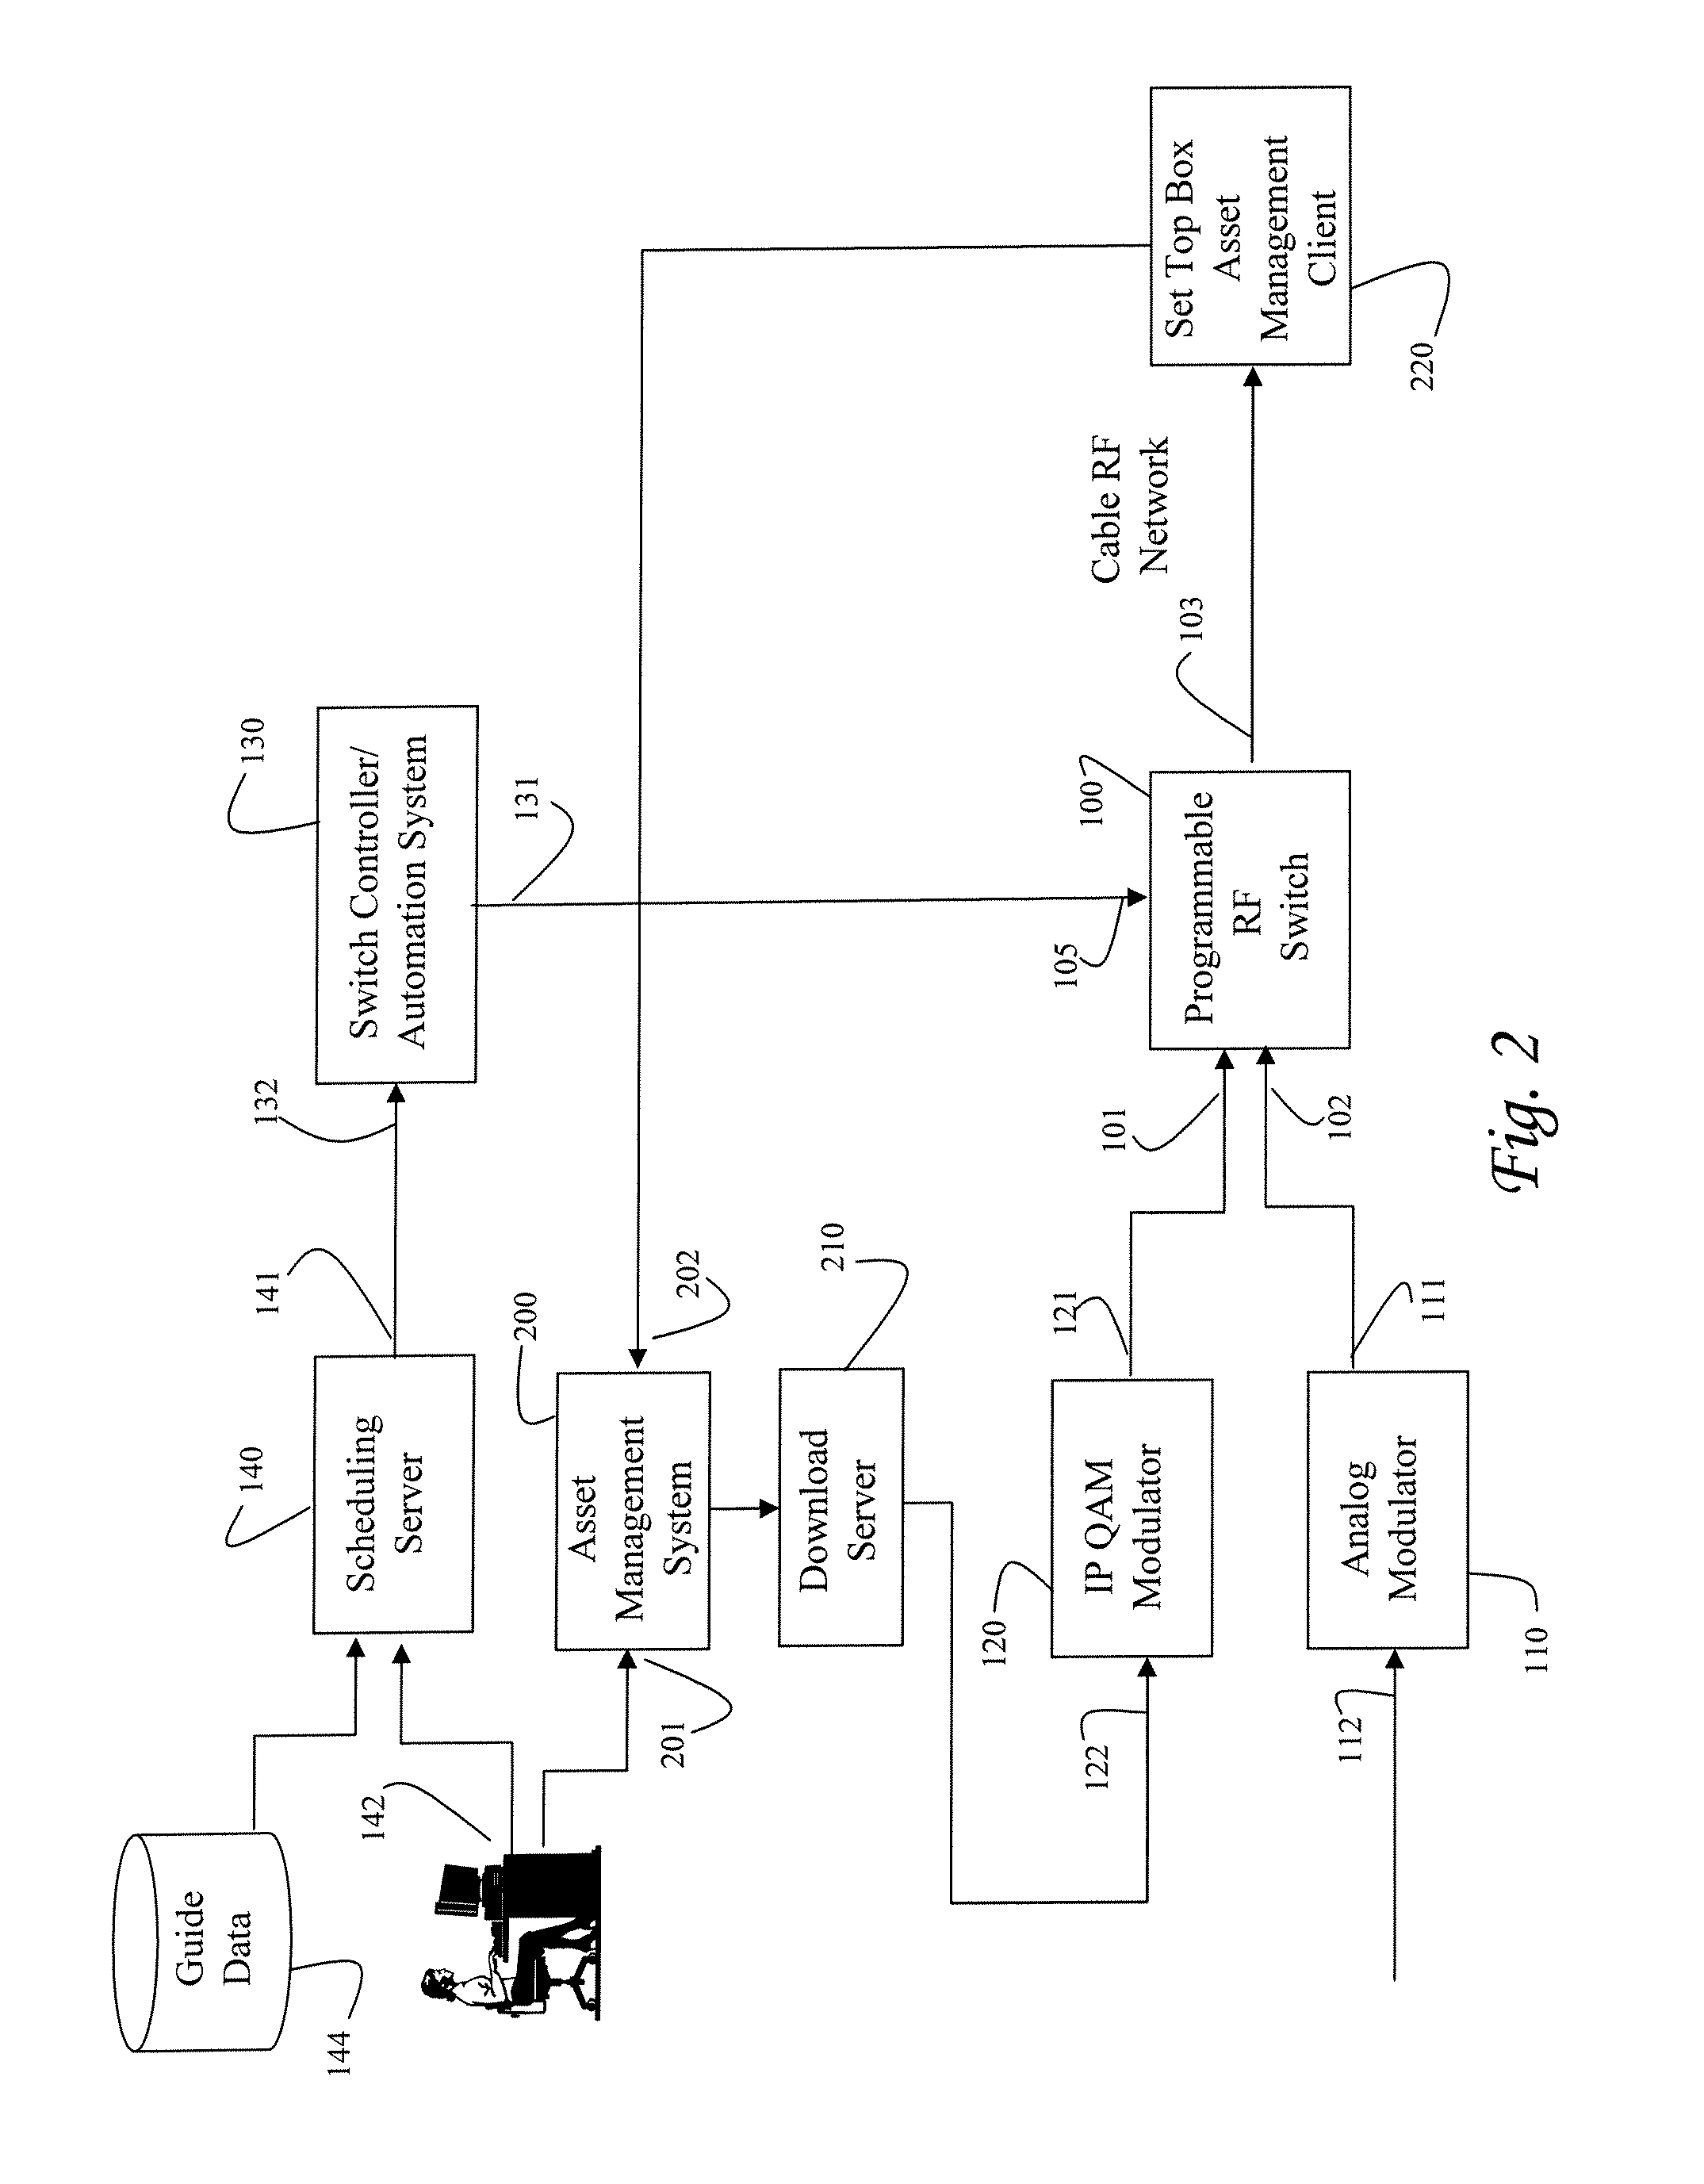 Systems and methods for analog channel reuse in a cable system